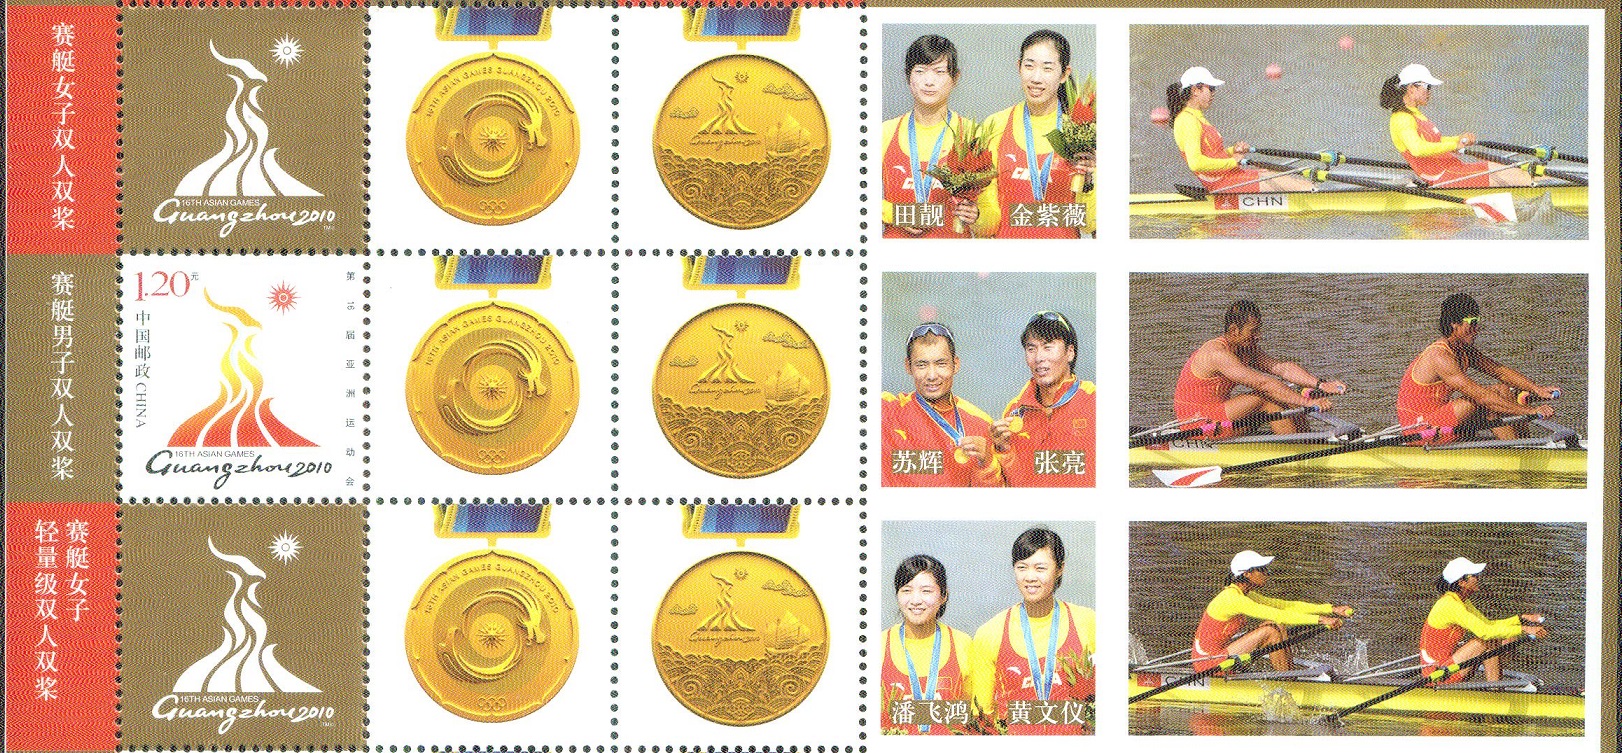 stamp chn 2010 ss 16th asian games guangzhou chinese gold medal wins w2x m2x lw2x